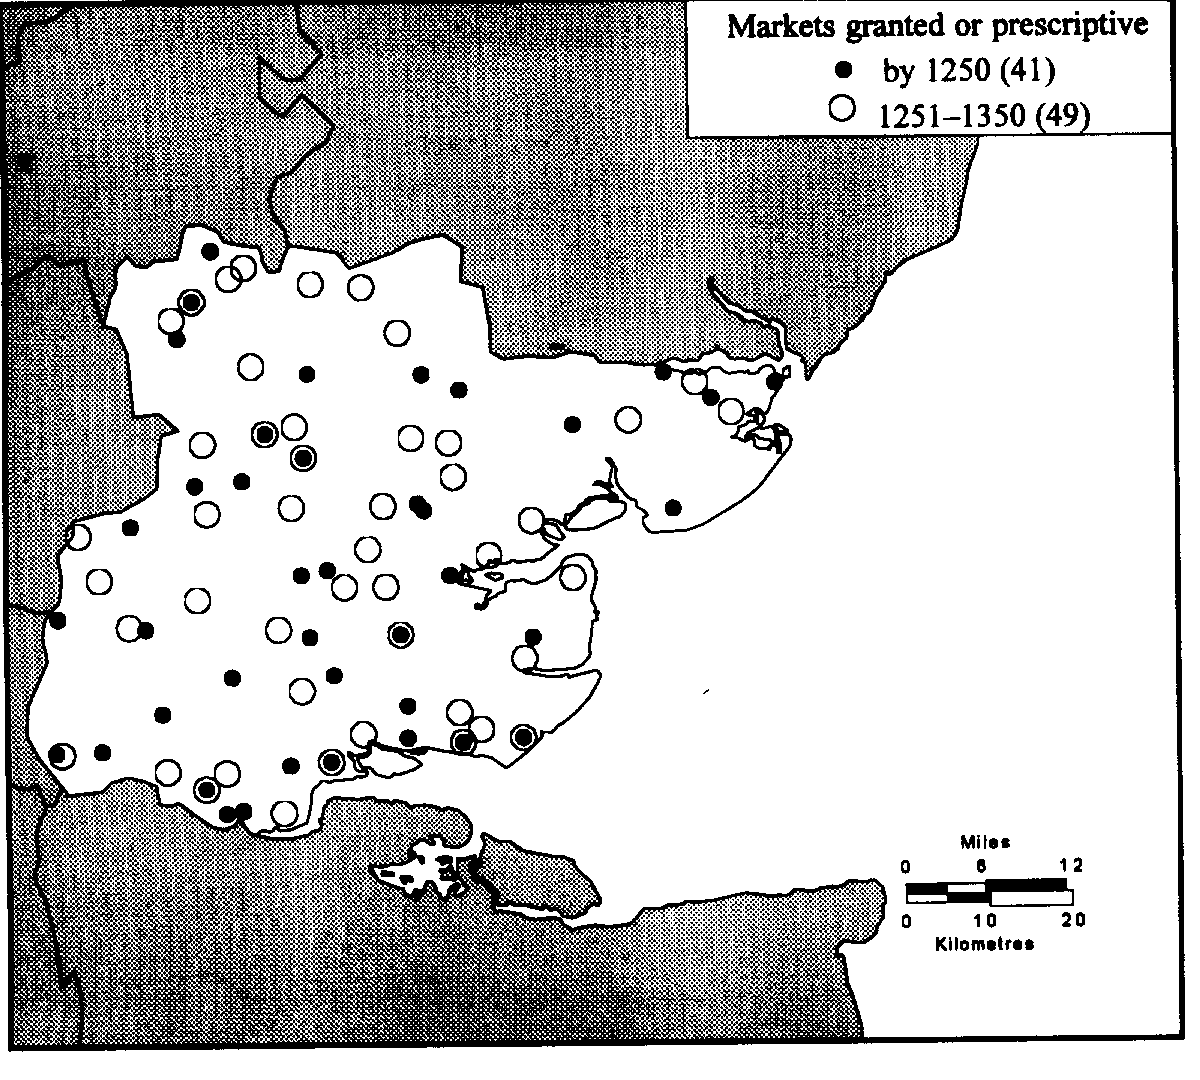 Fig. 4. Essex: prescriptive and granted markets up to 1350